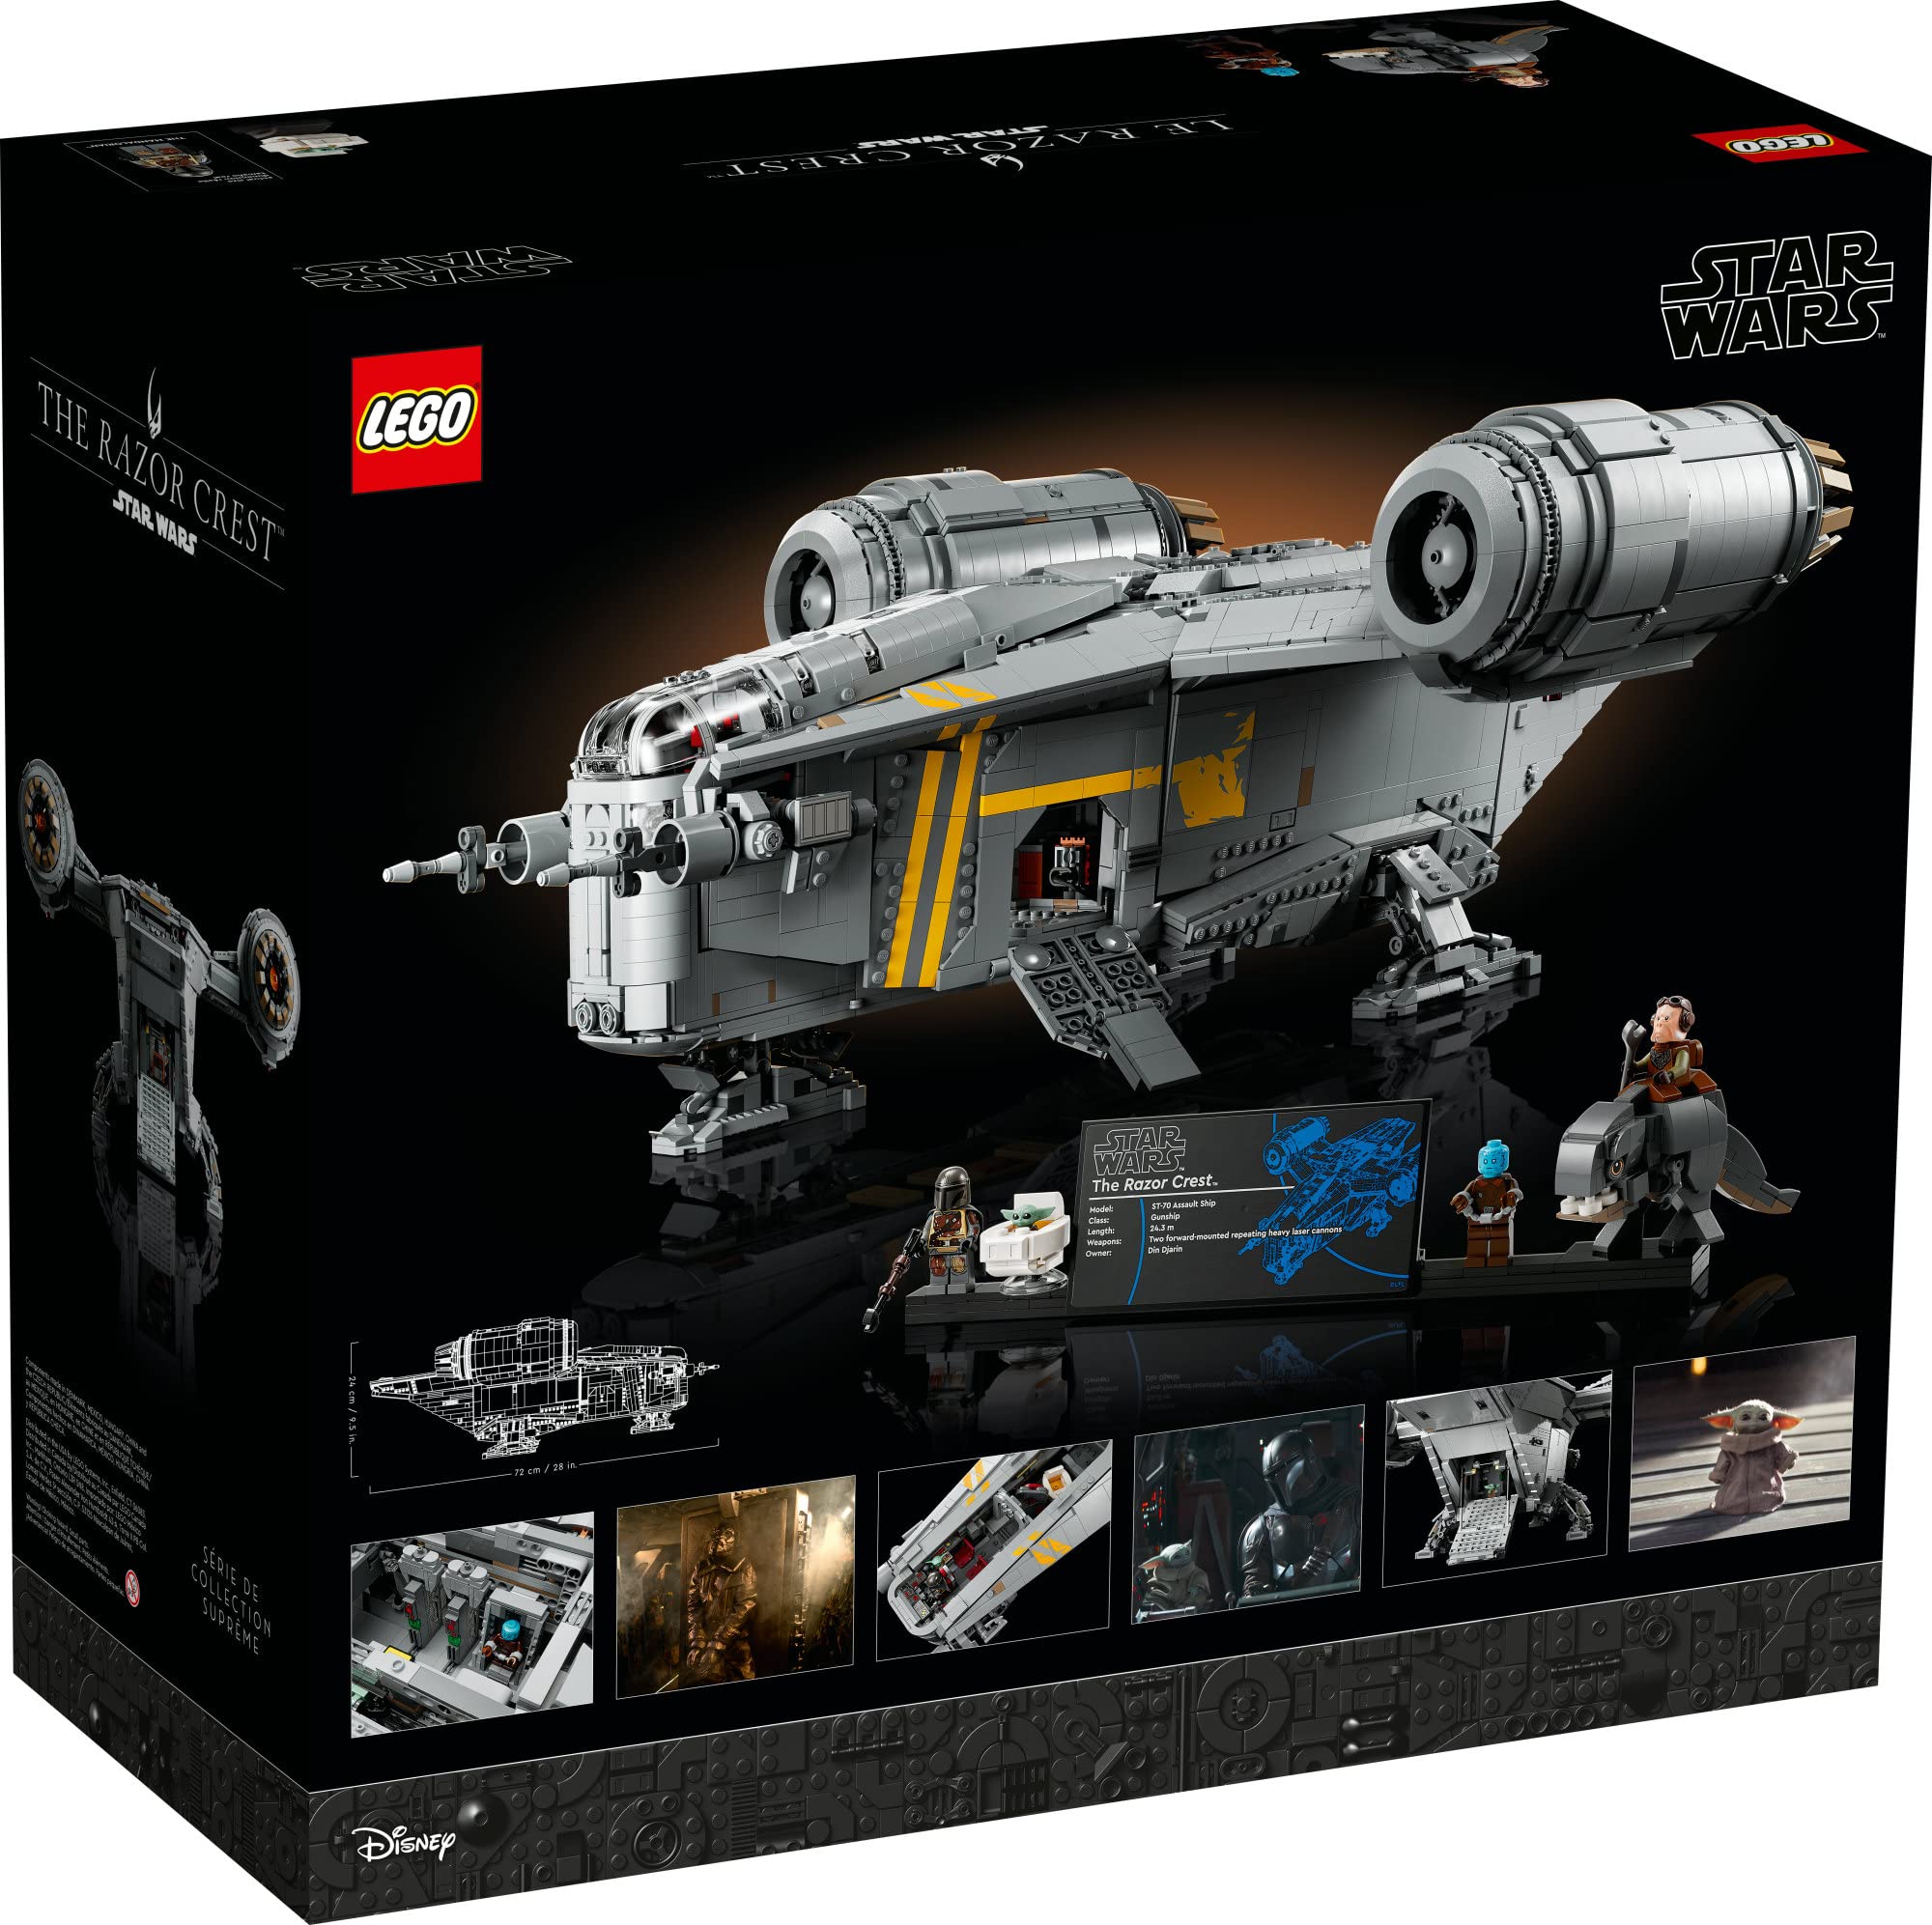 LEGO Star Wars The Razor Crest 75331 UCS Set, Ultimate Collectors Series Starship 20% off + 10% back from Prime Store Card $379.99